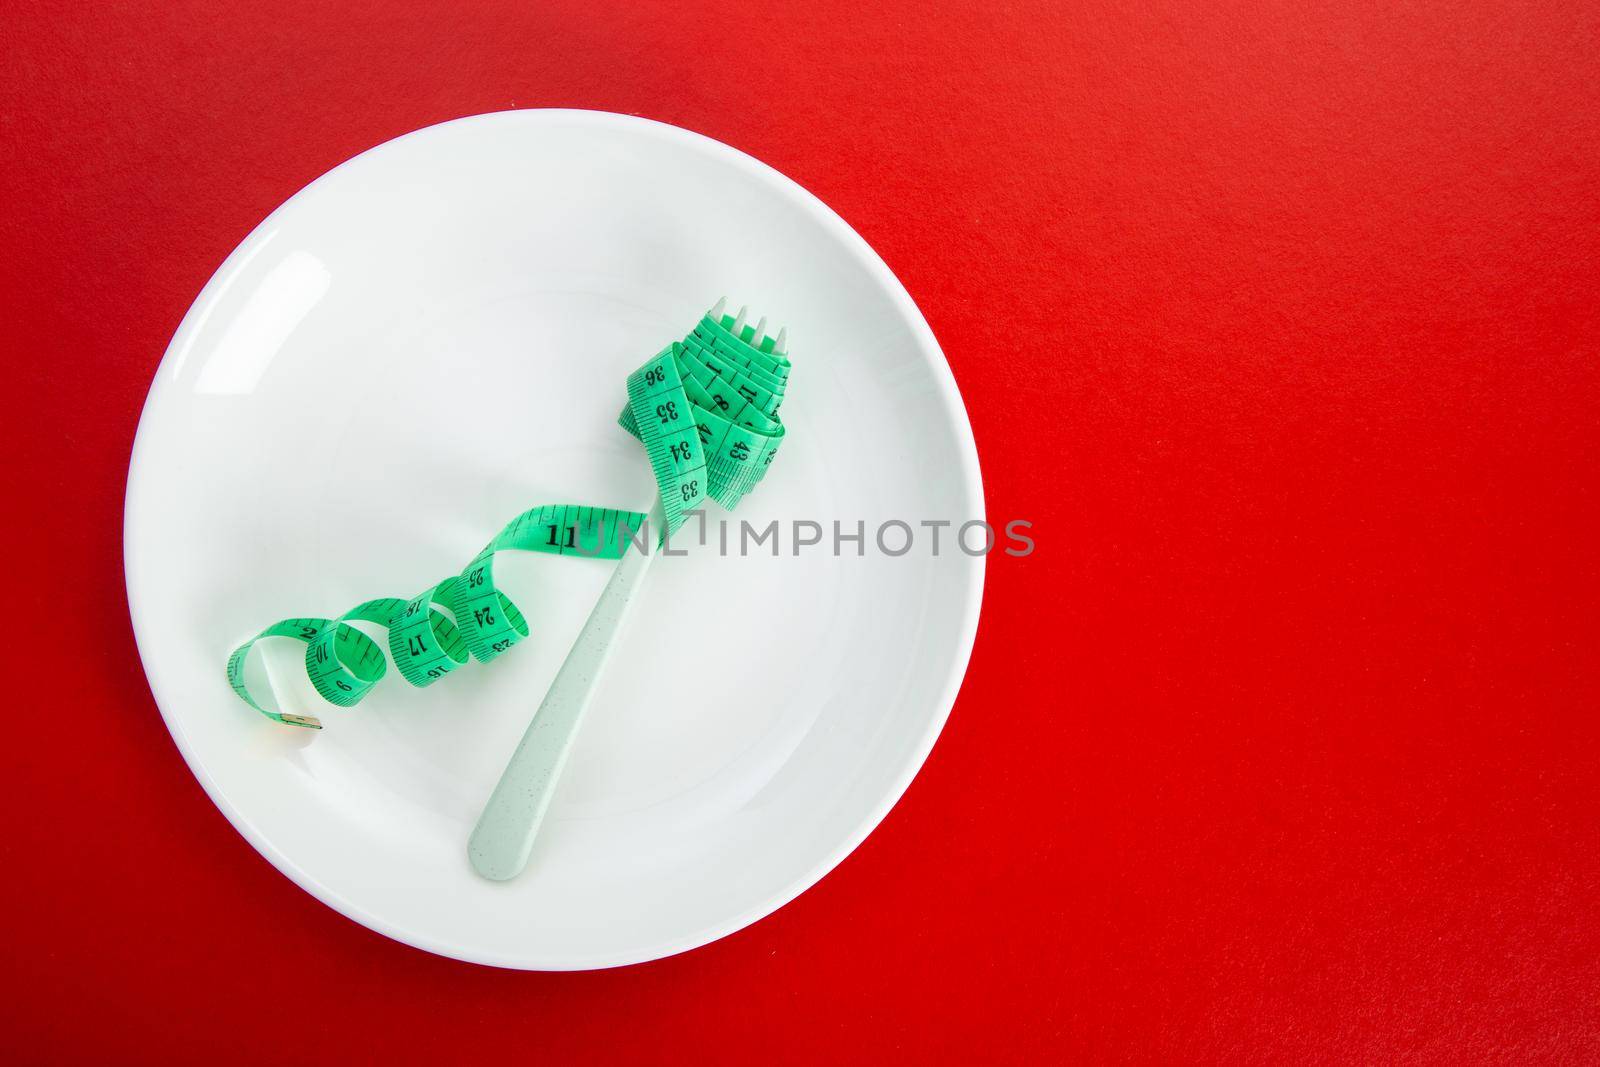 Diet for weight loss concept. Proper nutrition. Empty plate with fork and measuring tape.